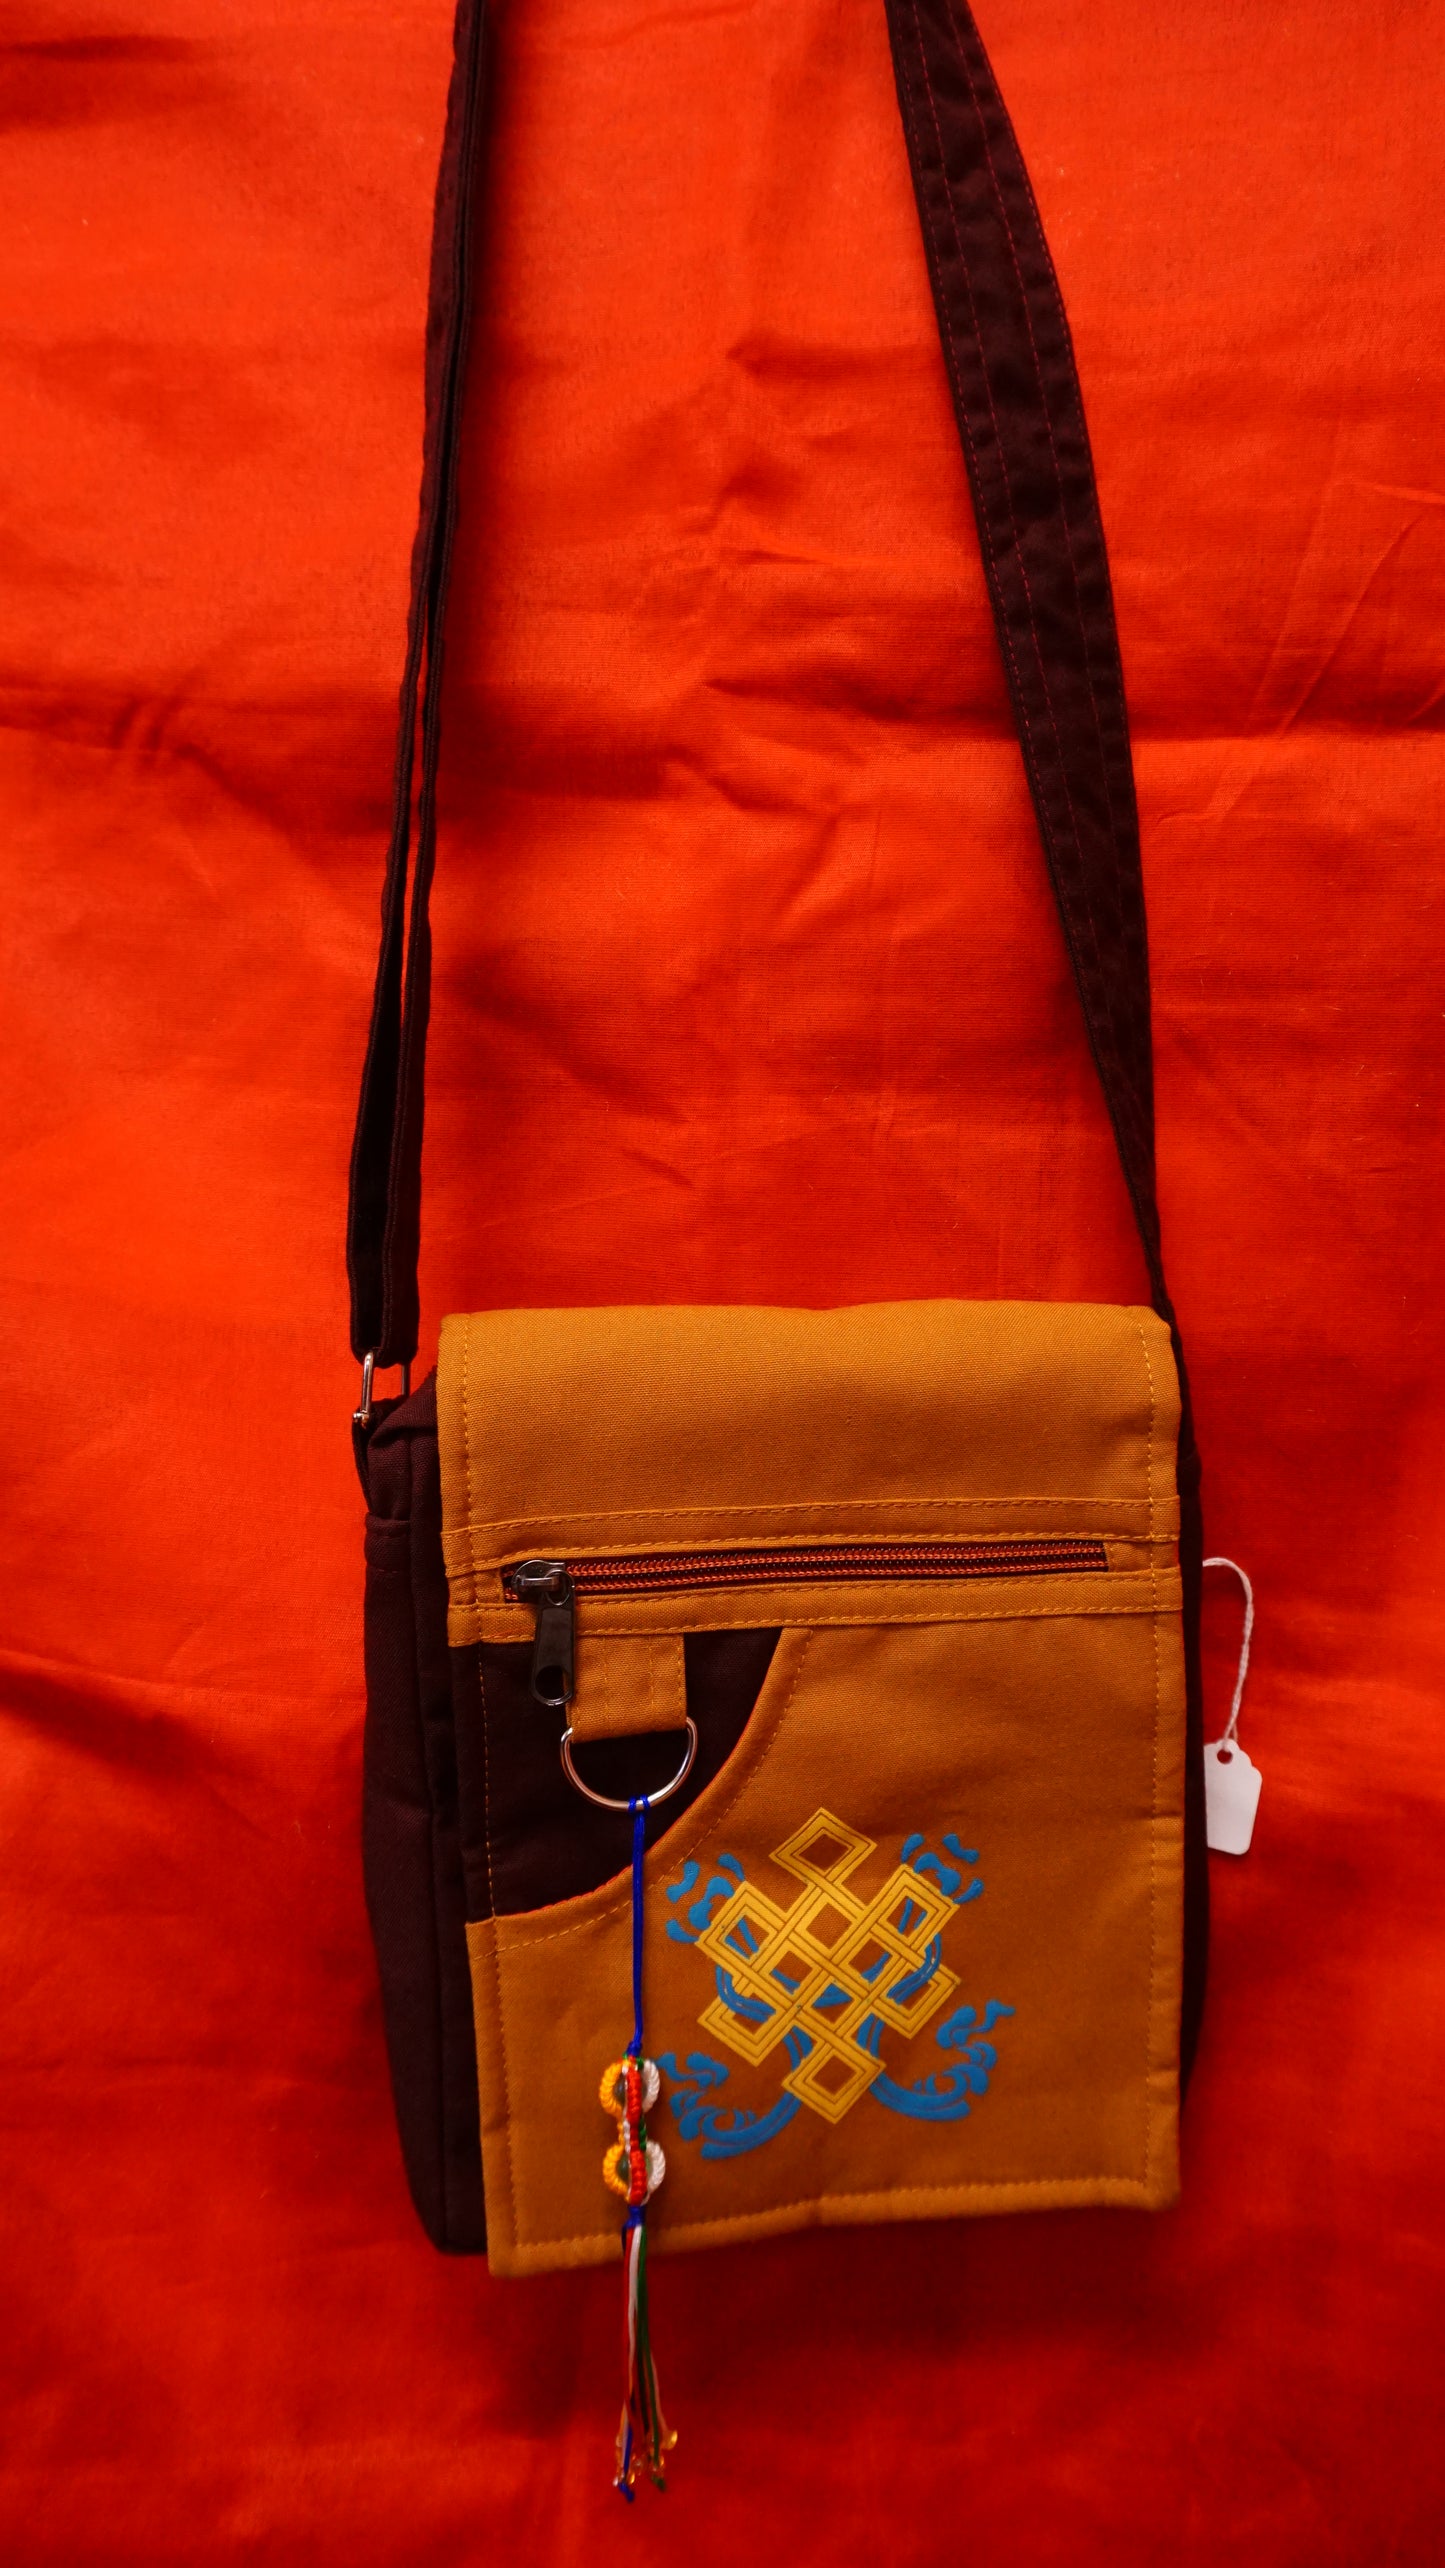 Decorated Gold and Maroon Bag.